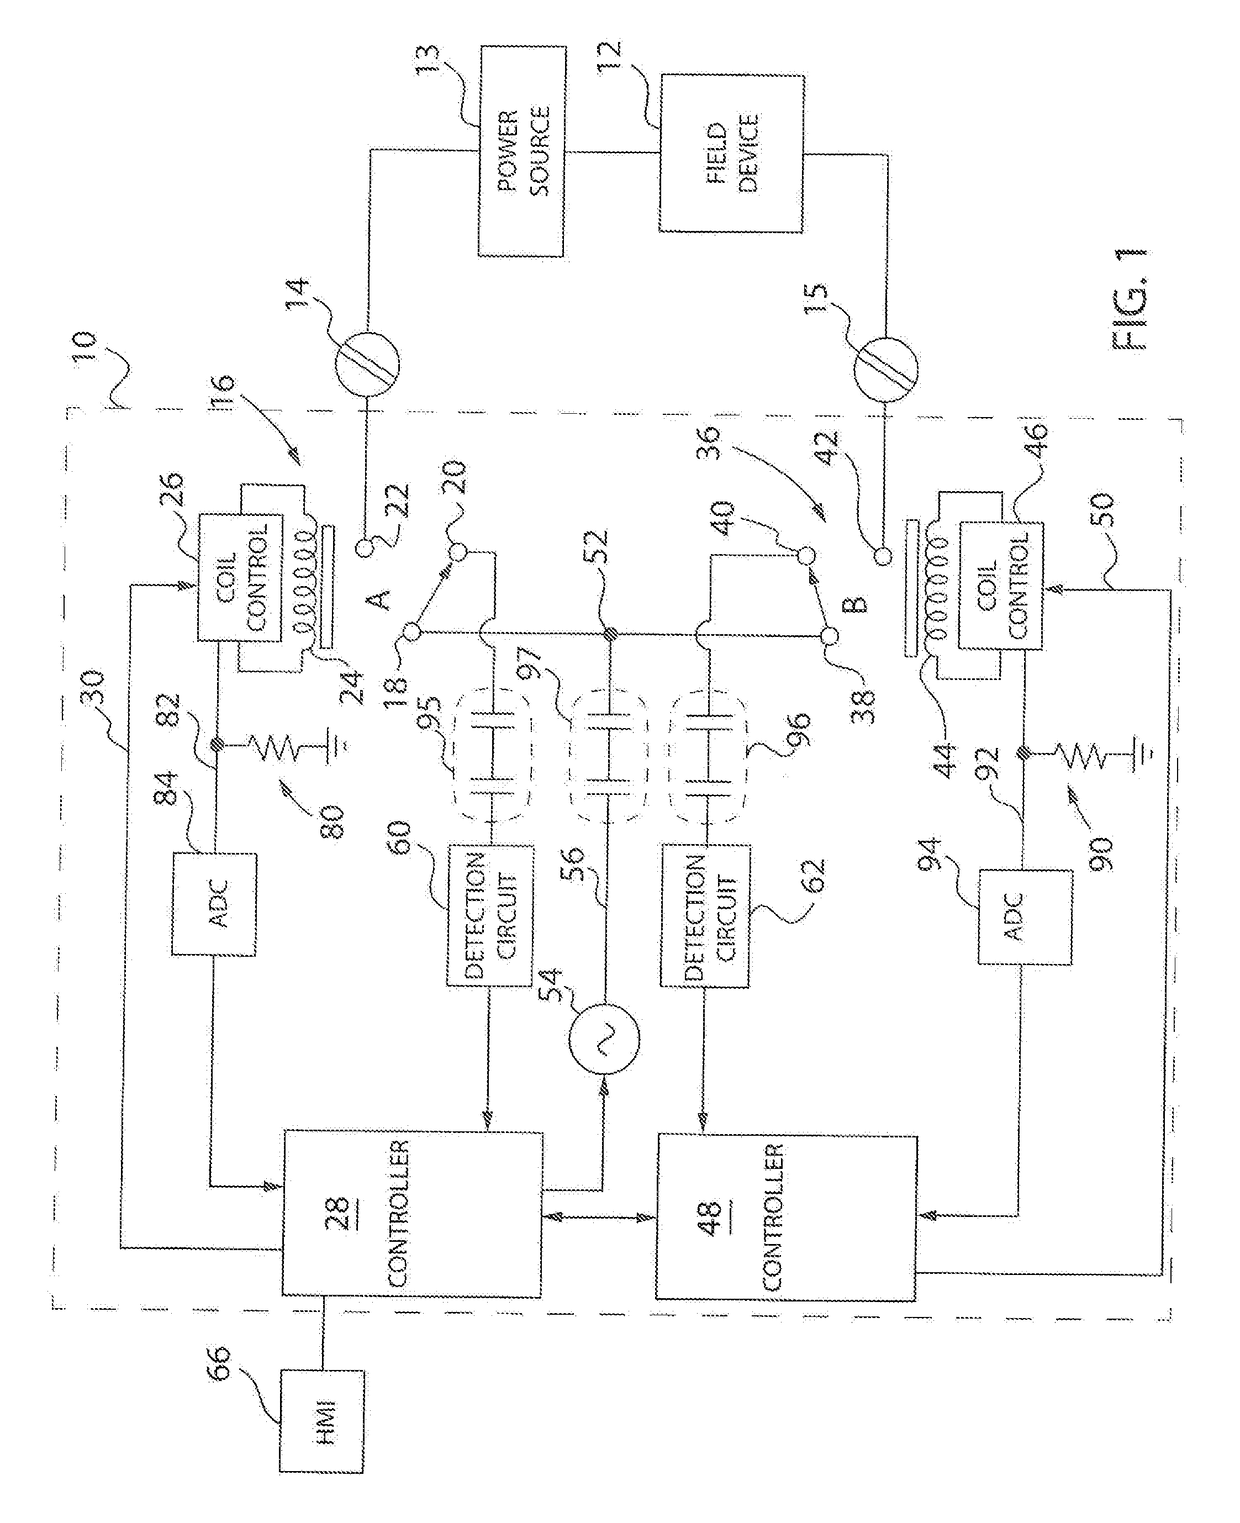 Electrical Relay System with Failure Detection